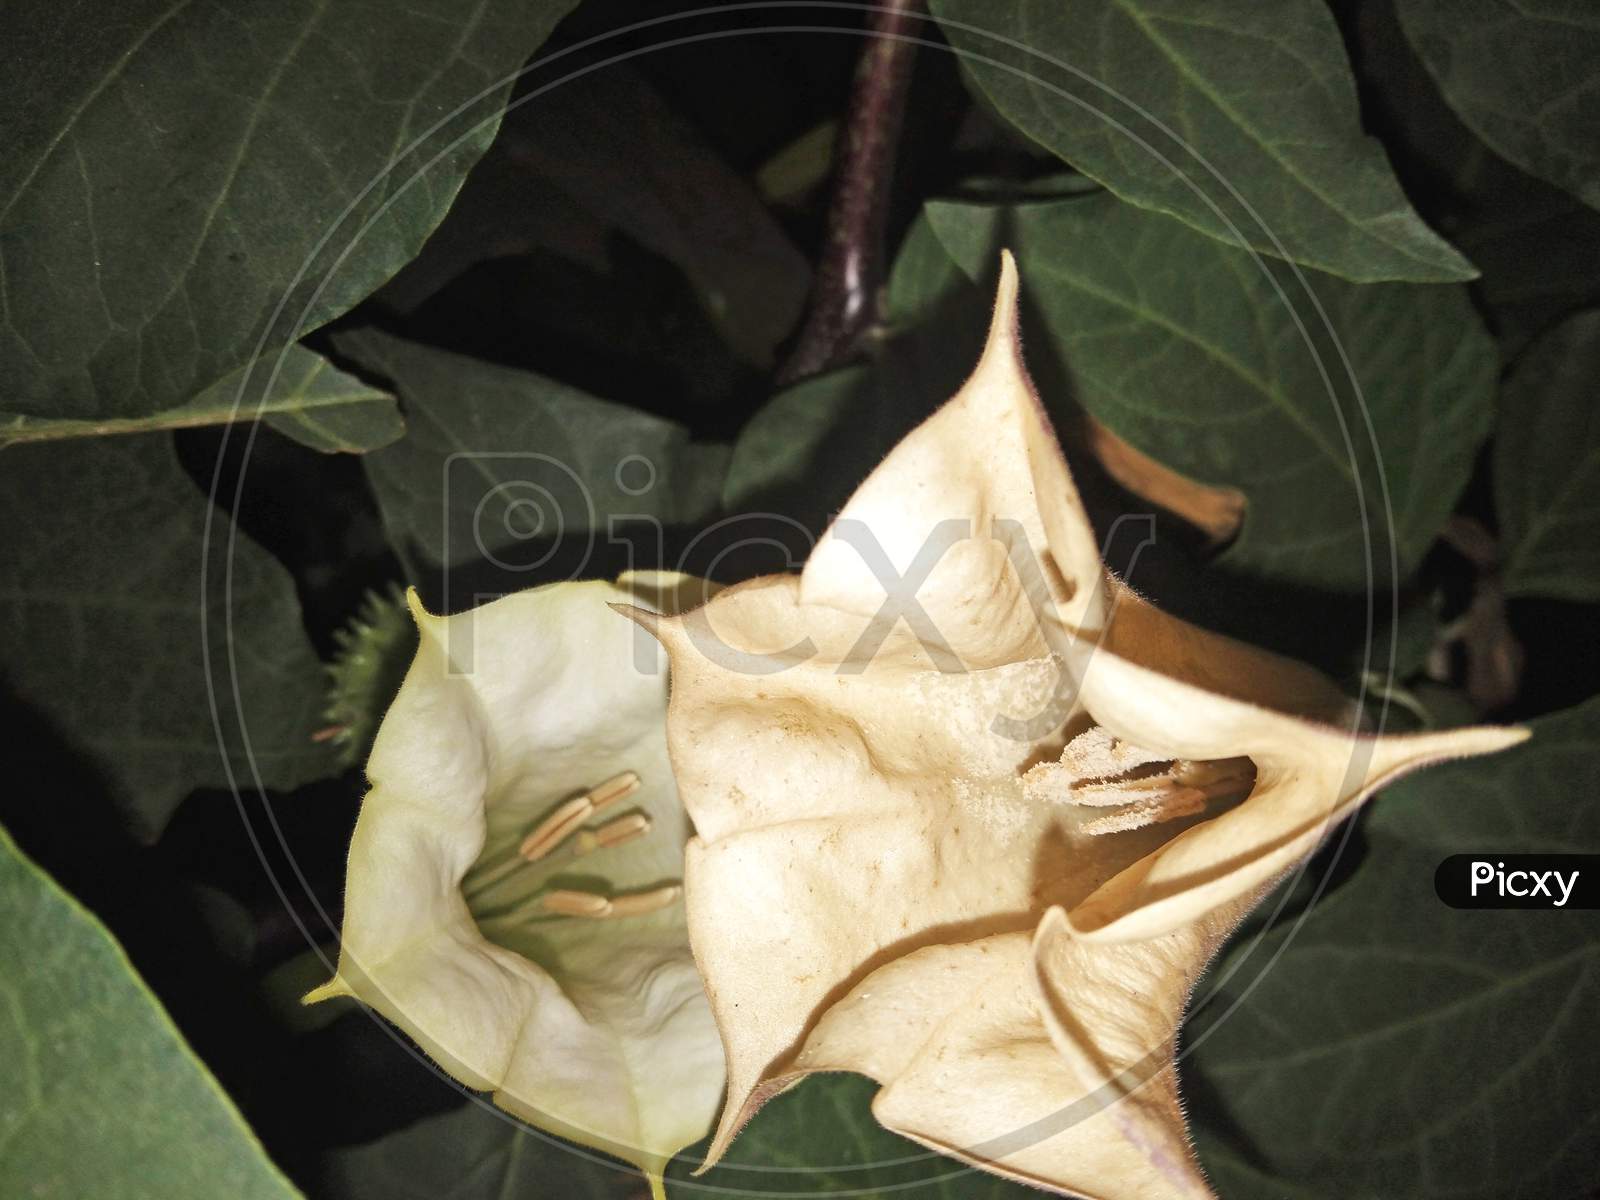 This Is Datura Innoxia Flower At Night Time. This Is A Herbal Medicine.